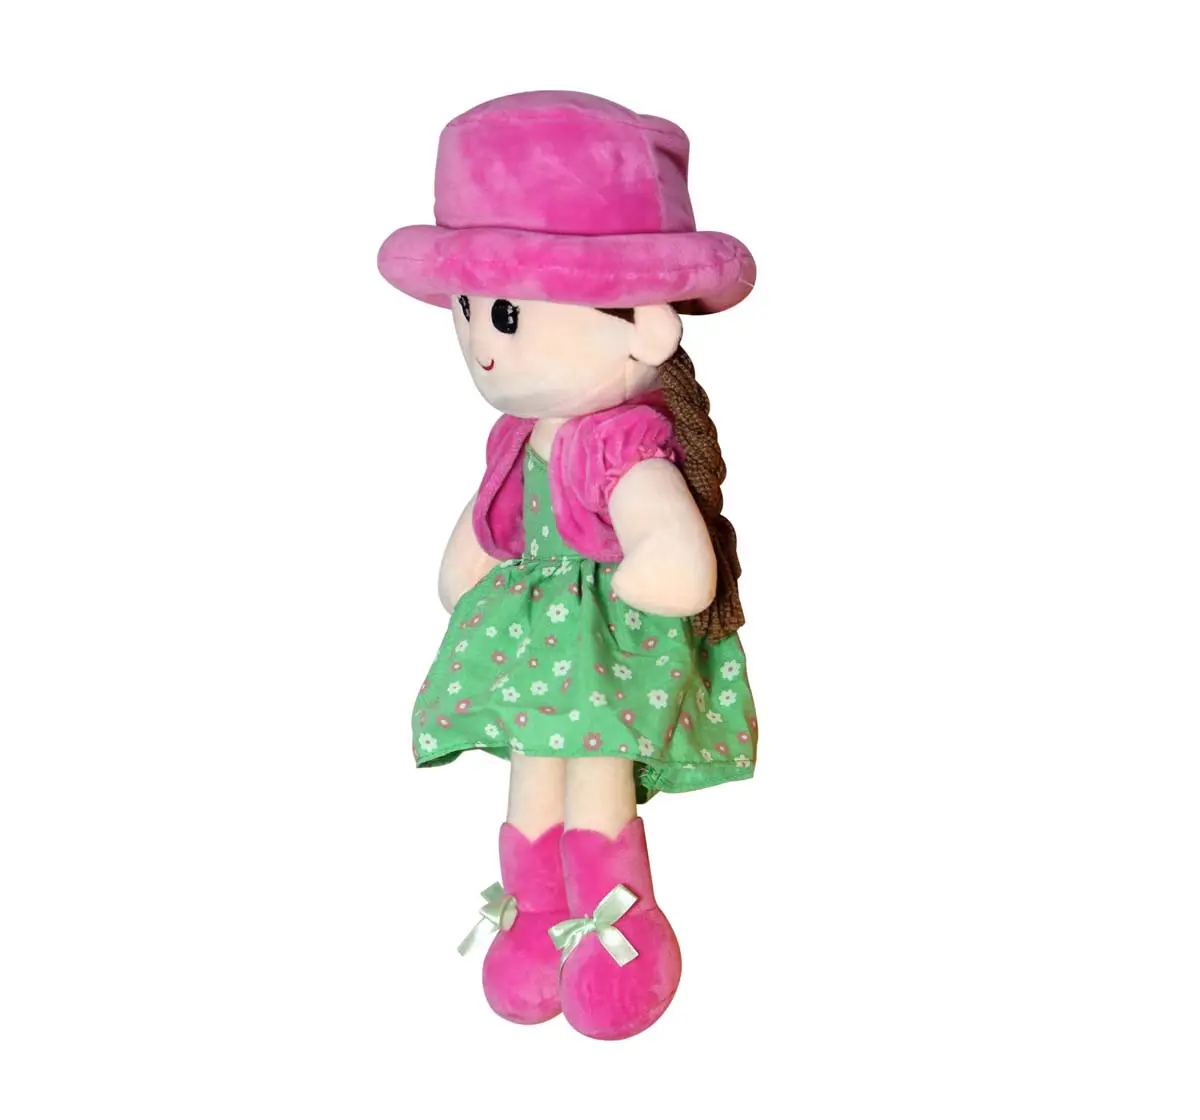 Disney Flamingo Doll With Round Cap Dolls & Puppets for Kids age 12M+ 48.26 Cm 